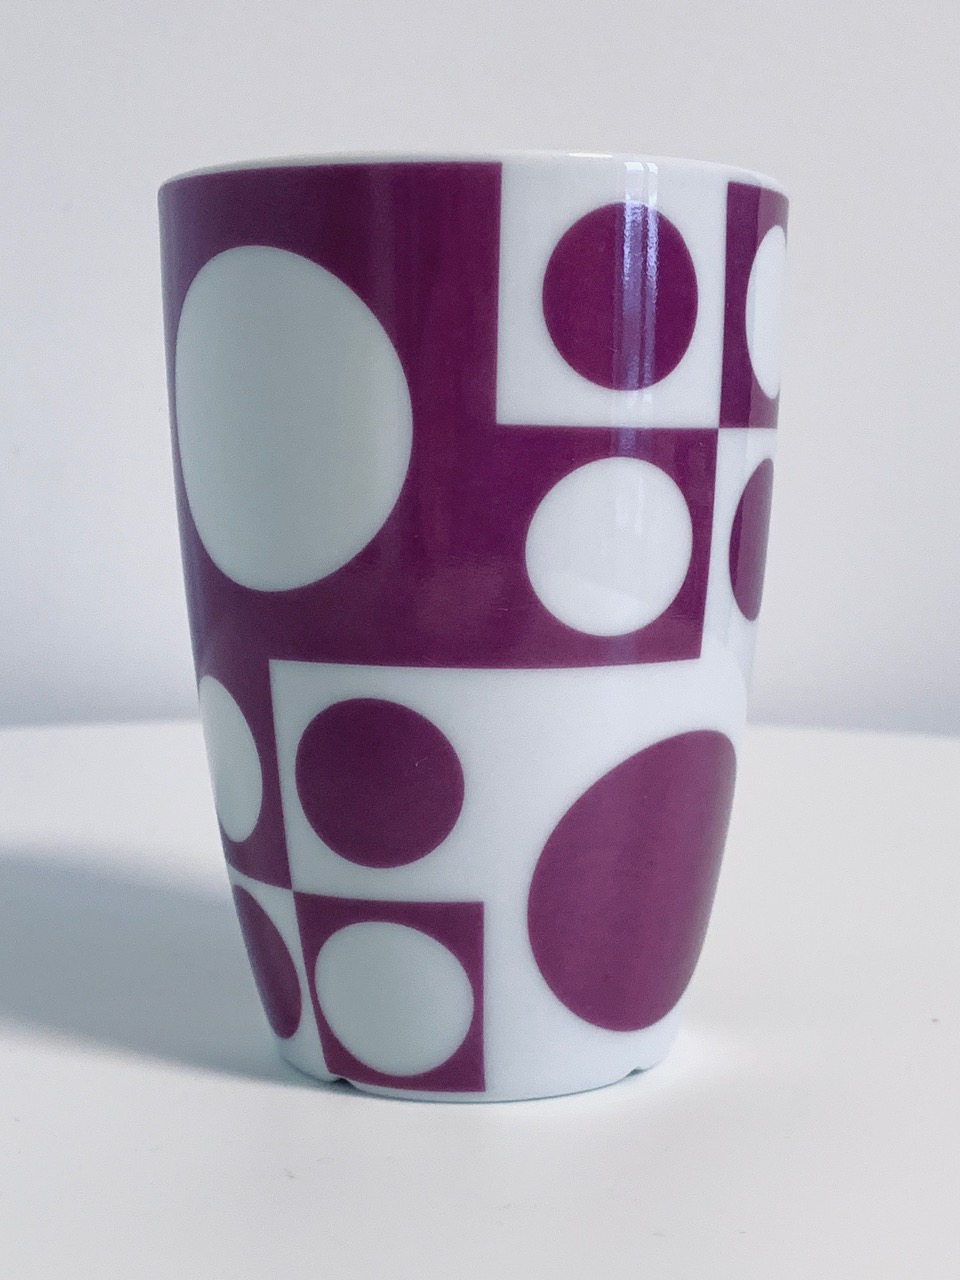 Picture of the Verner Panton Menu cup purple white 210 ml offered in this advertisement.